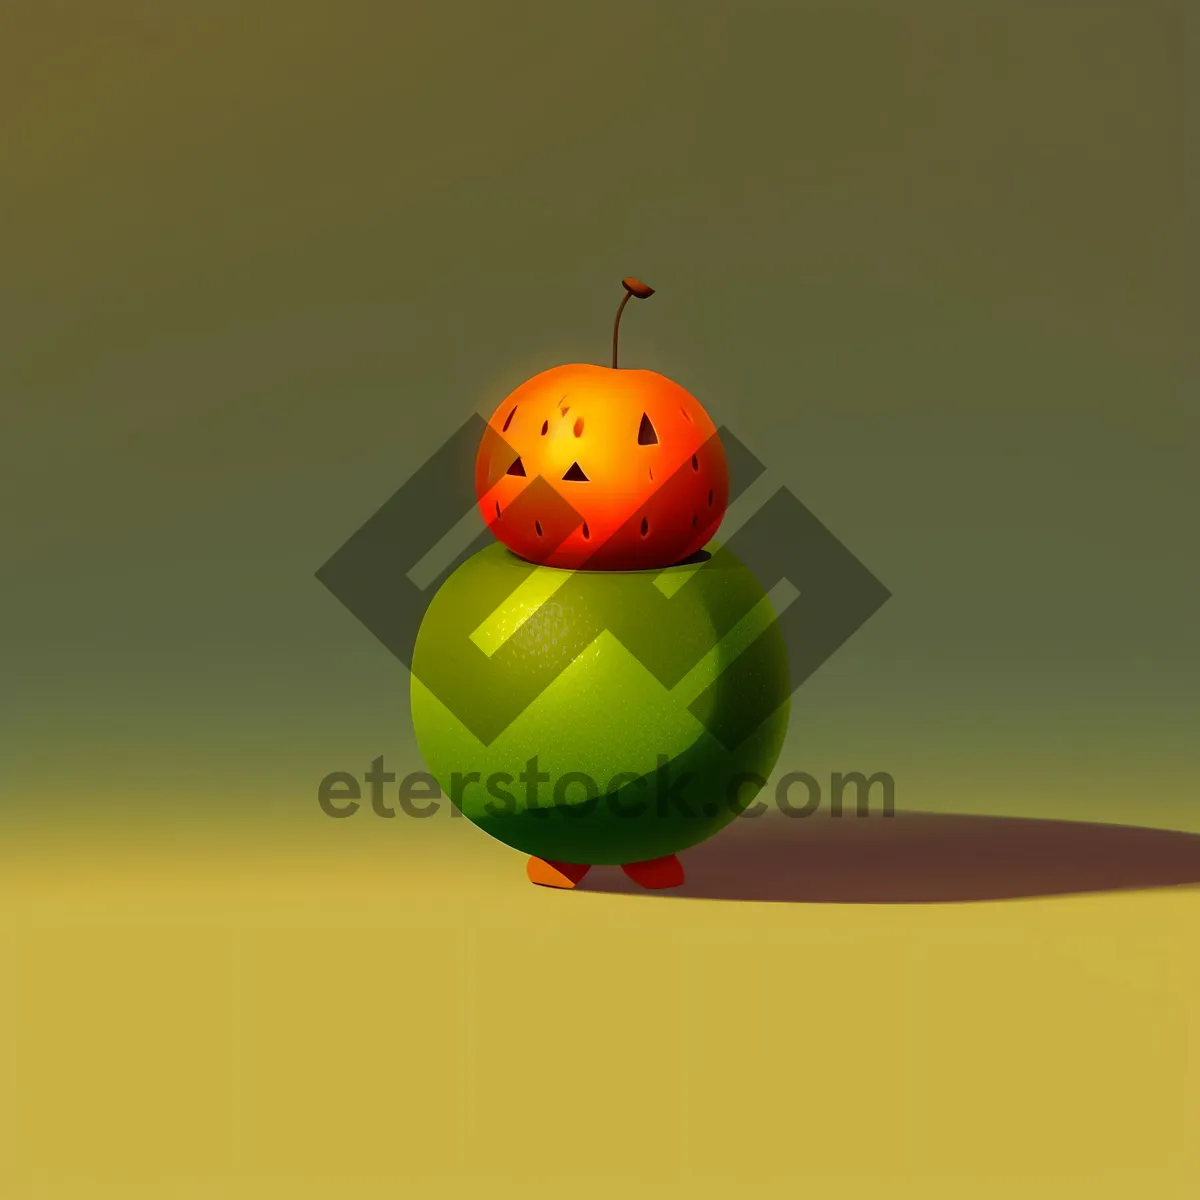 Picture of Colorful Ladybug Beetle Plays Billiards on Shiny Pool Table